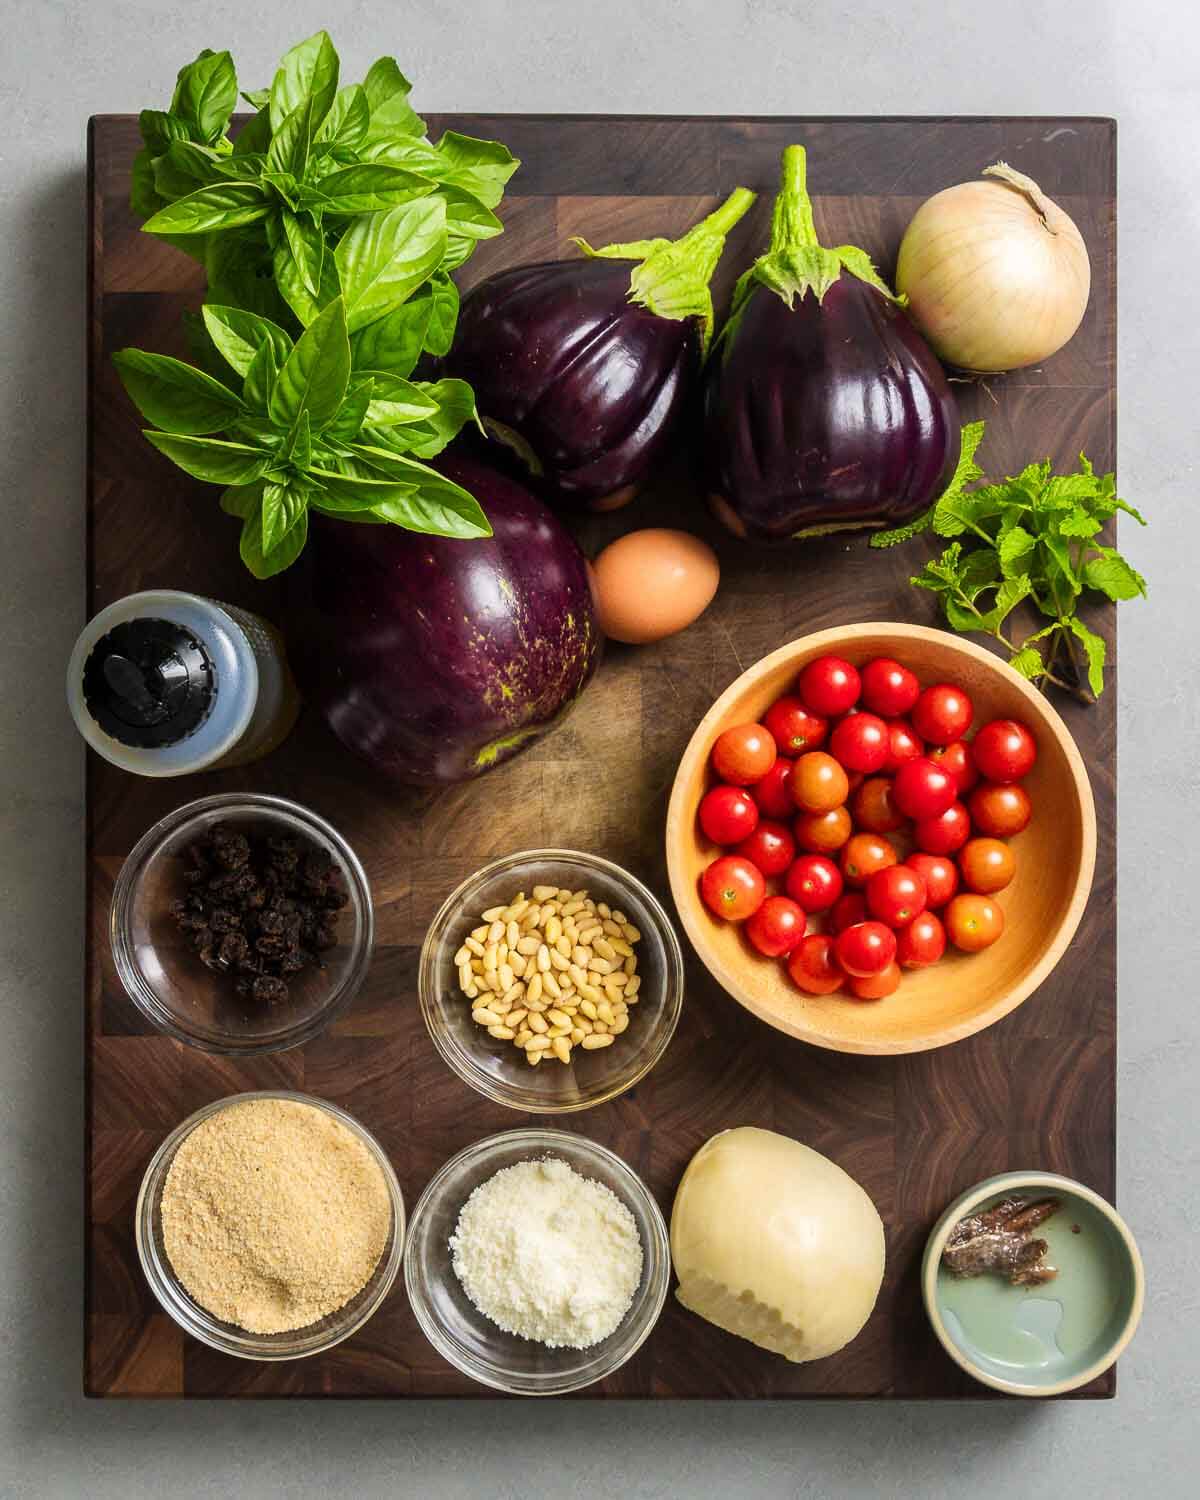 Ingredients shown: basil, mint, eggplant, onion, garlic, egg, olive oil, raisins, pine nuts, cherry tomatoes, breadcrumbs, Pecorino, Scamorza, and and anchovies.